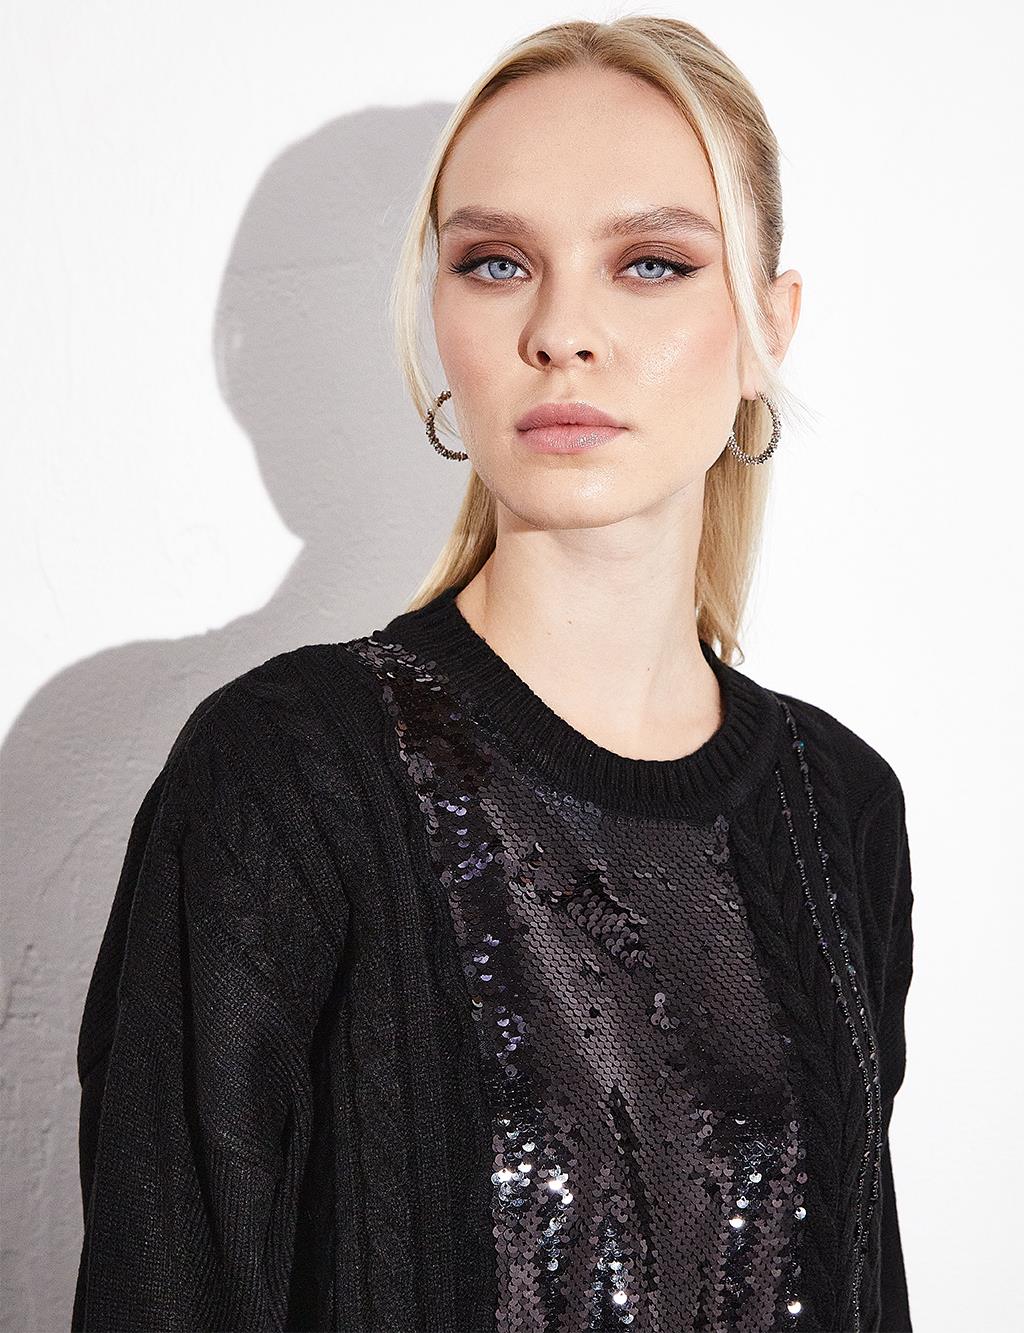 Sequined Knitwear Tunic Black